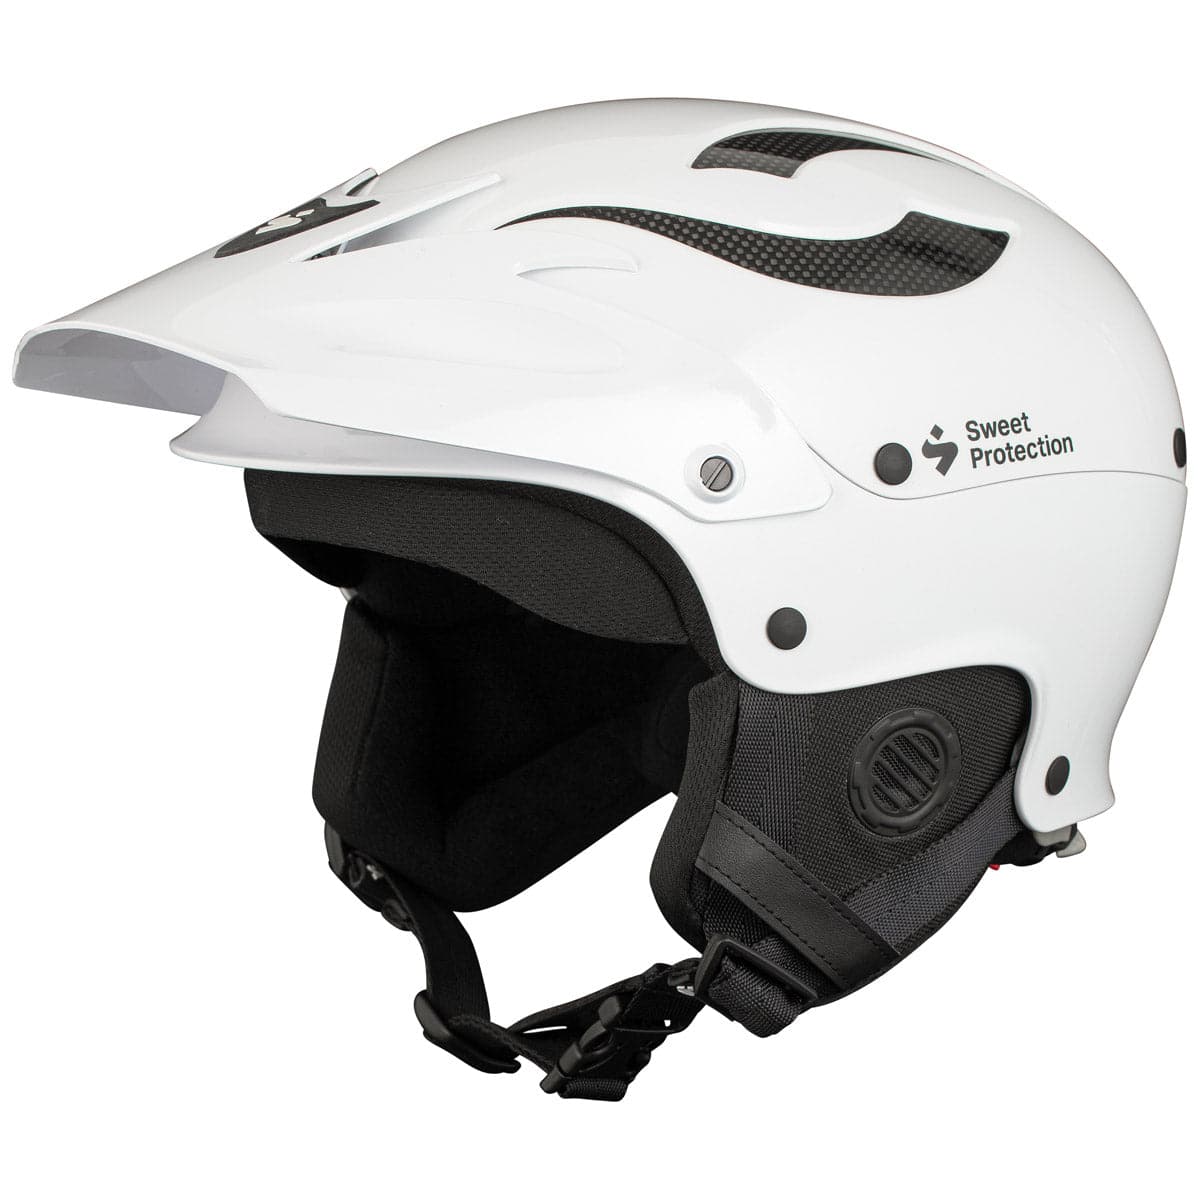 Featuring the Rocker Helmet helmet manufactured by Sweet shown here from a fourth angle.